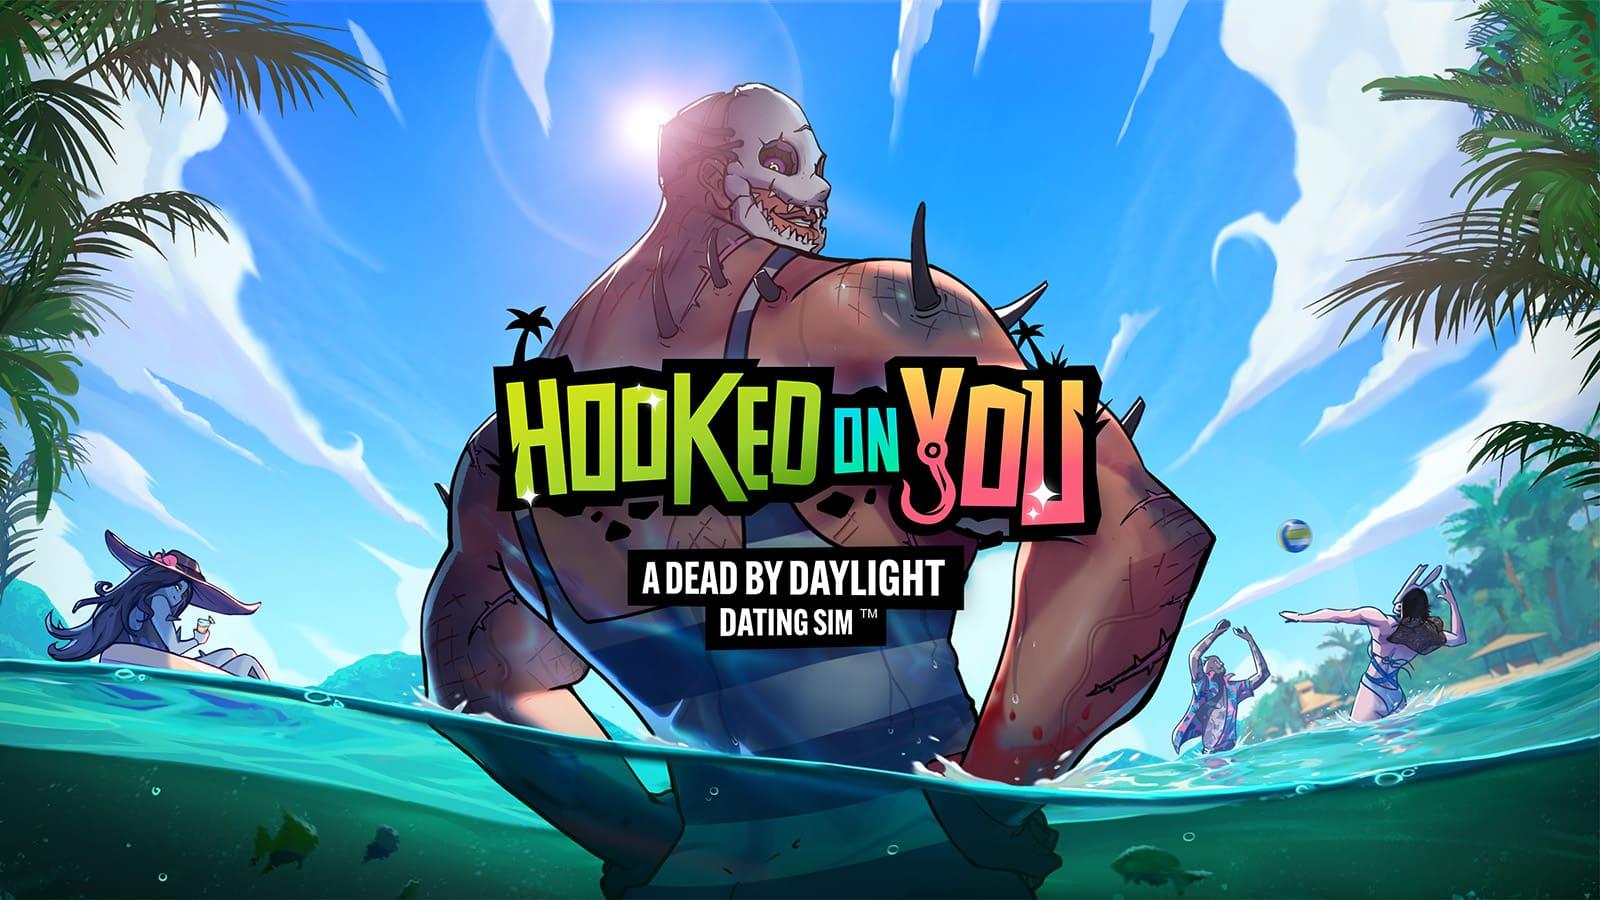 How To Get Hooked On You Rewards In Dead By Daylight - GINX TV